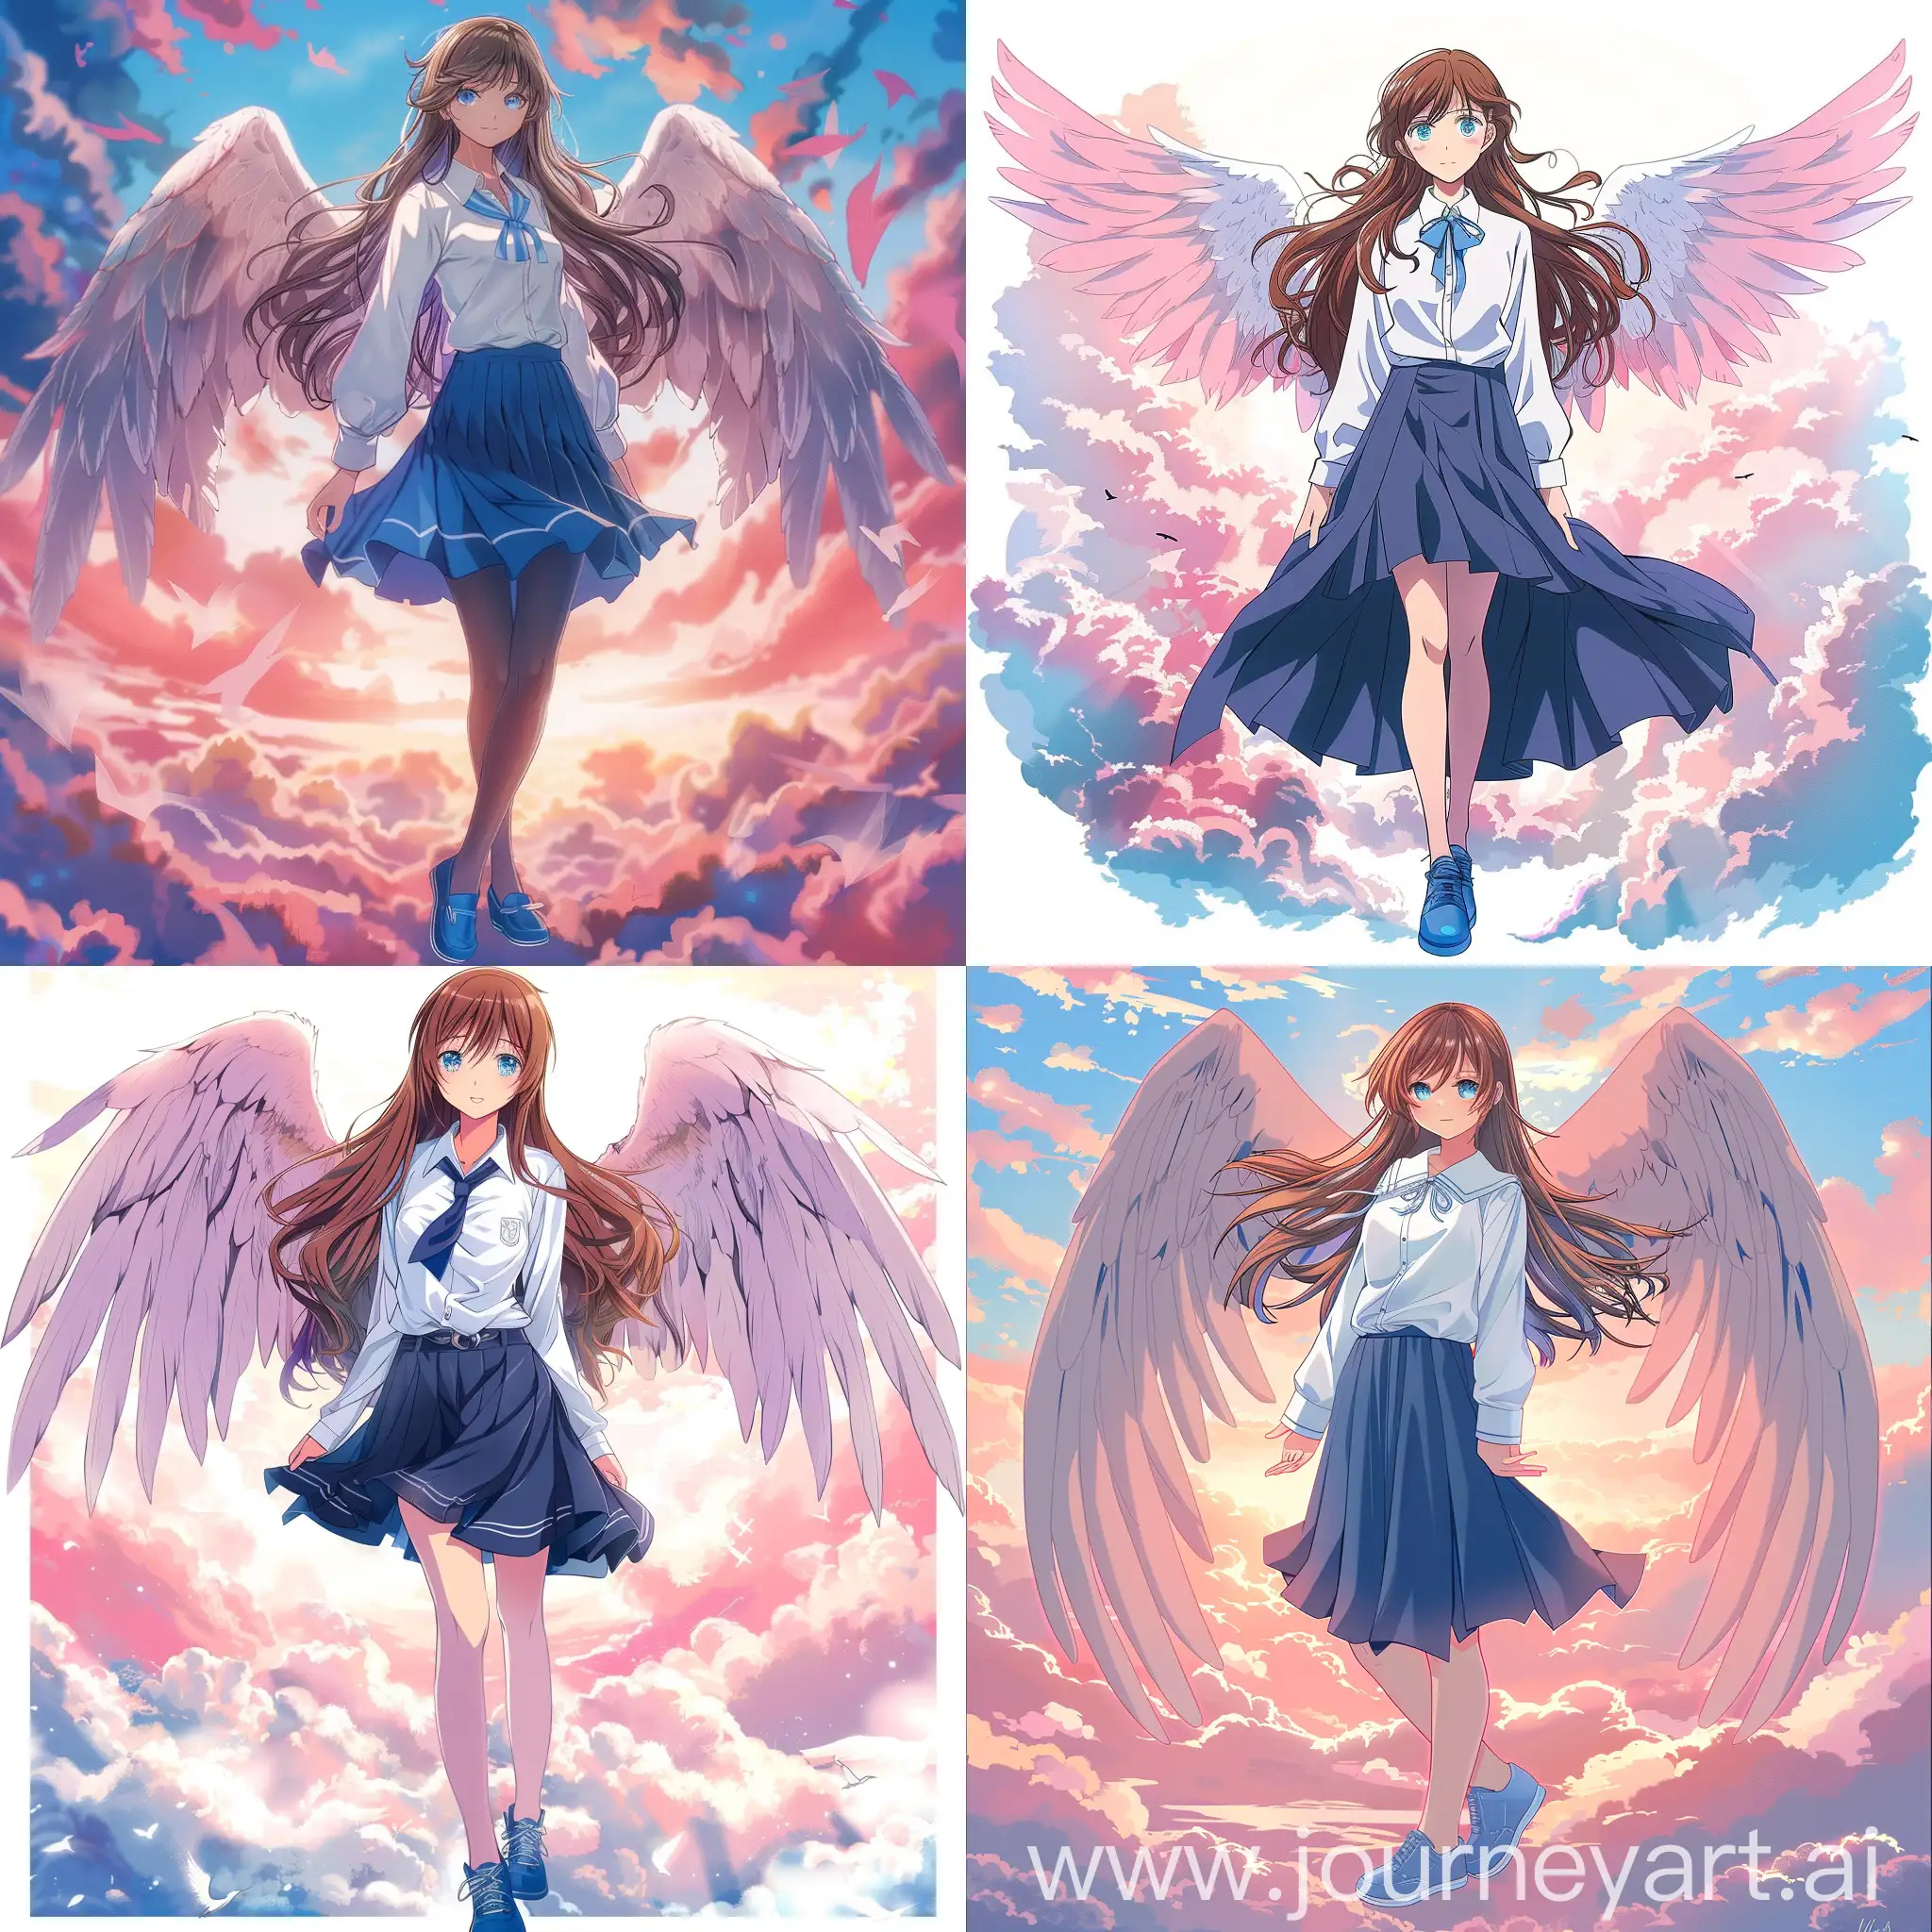 anime woman 25 years old with long brown hair and blue eyes. wearing a white school long shirt and a dark blue skirt with blue shoes. with a cute face. :3.pink sunset pink clouds. with wings like a angel,rating:general